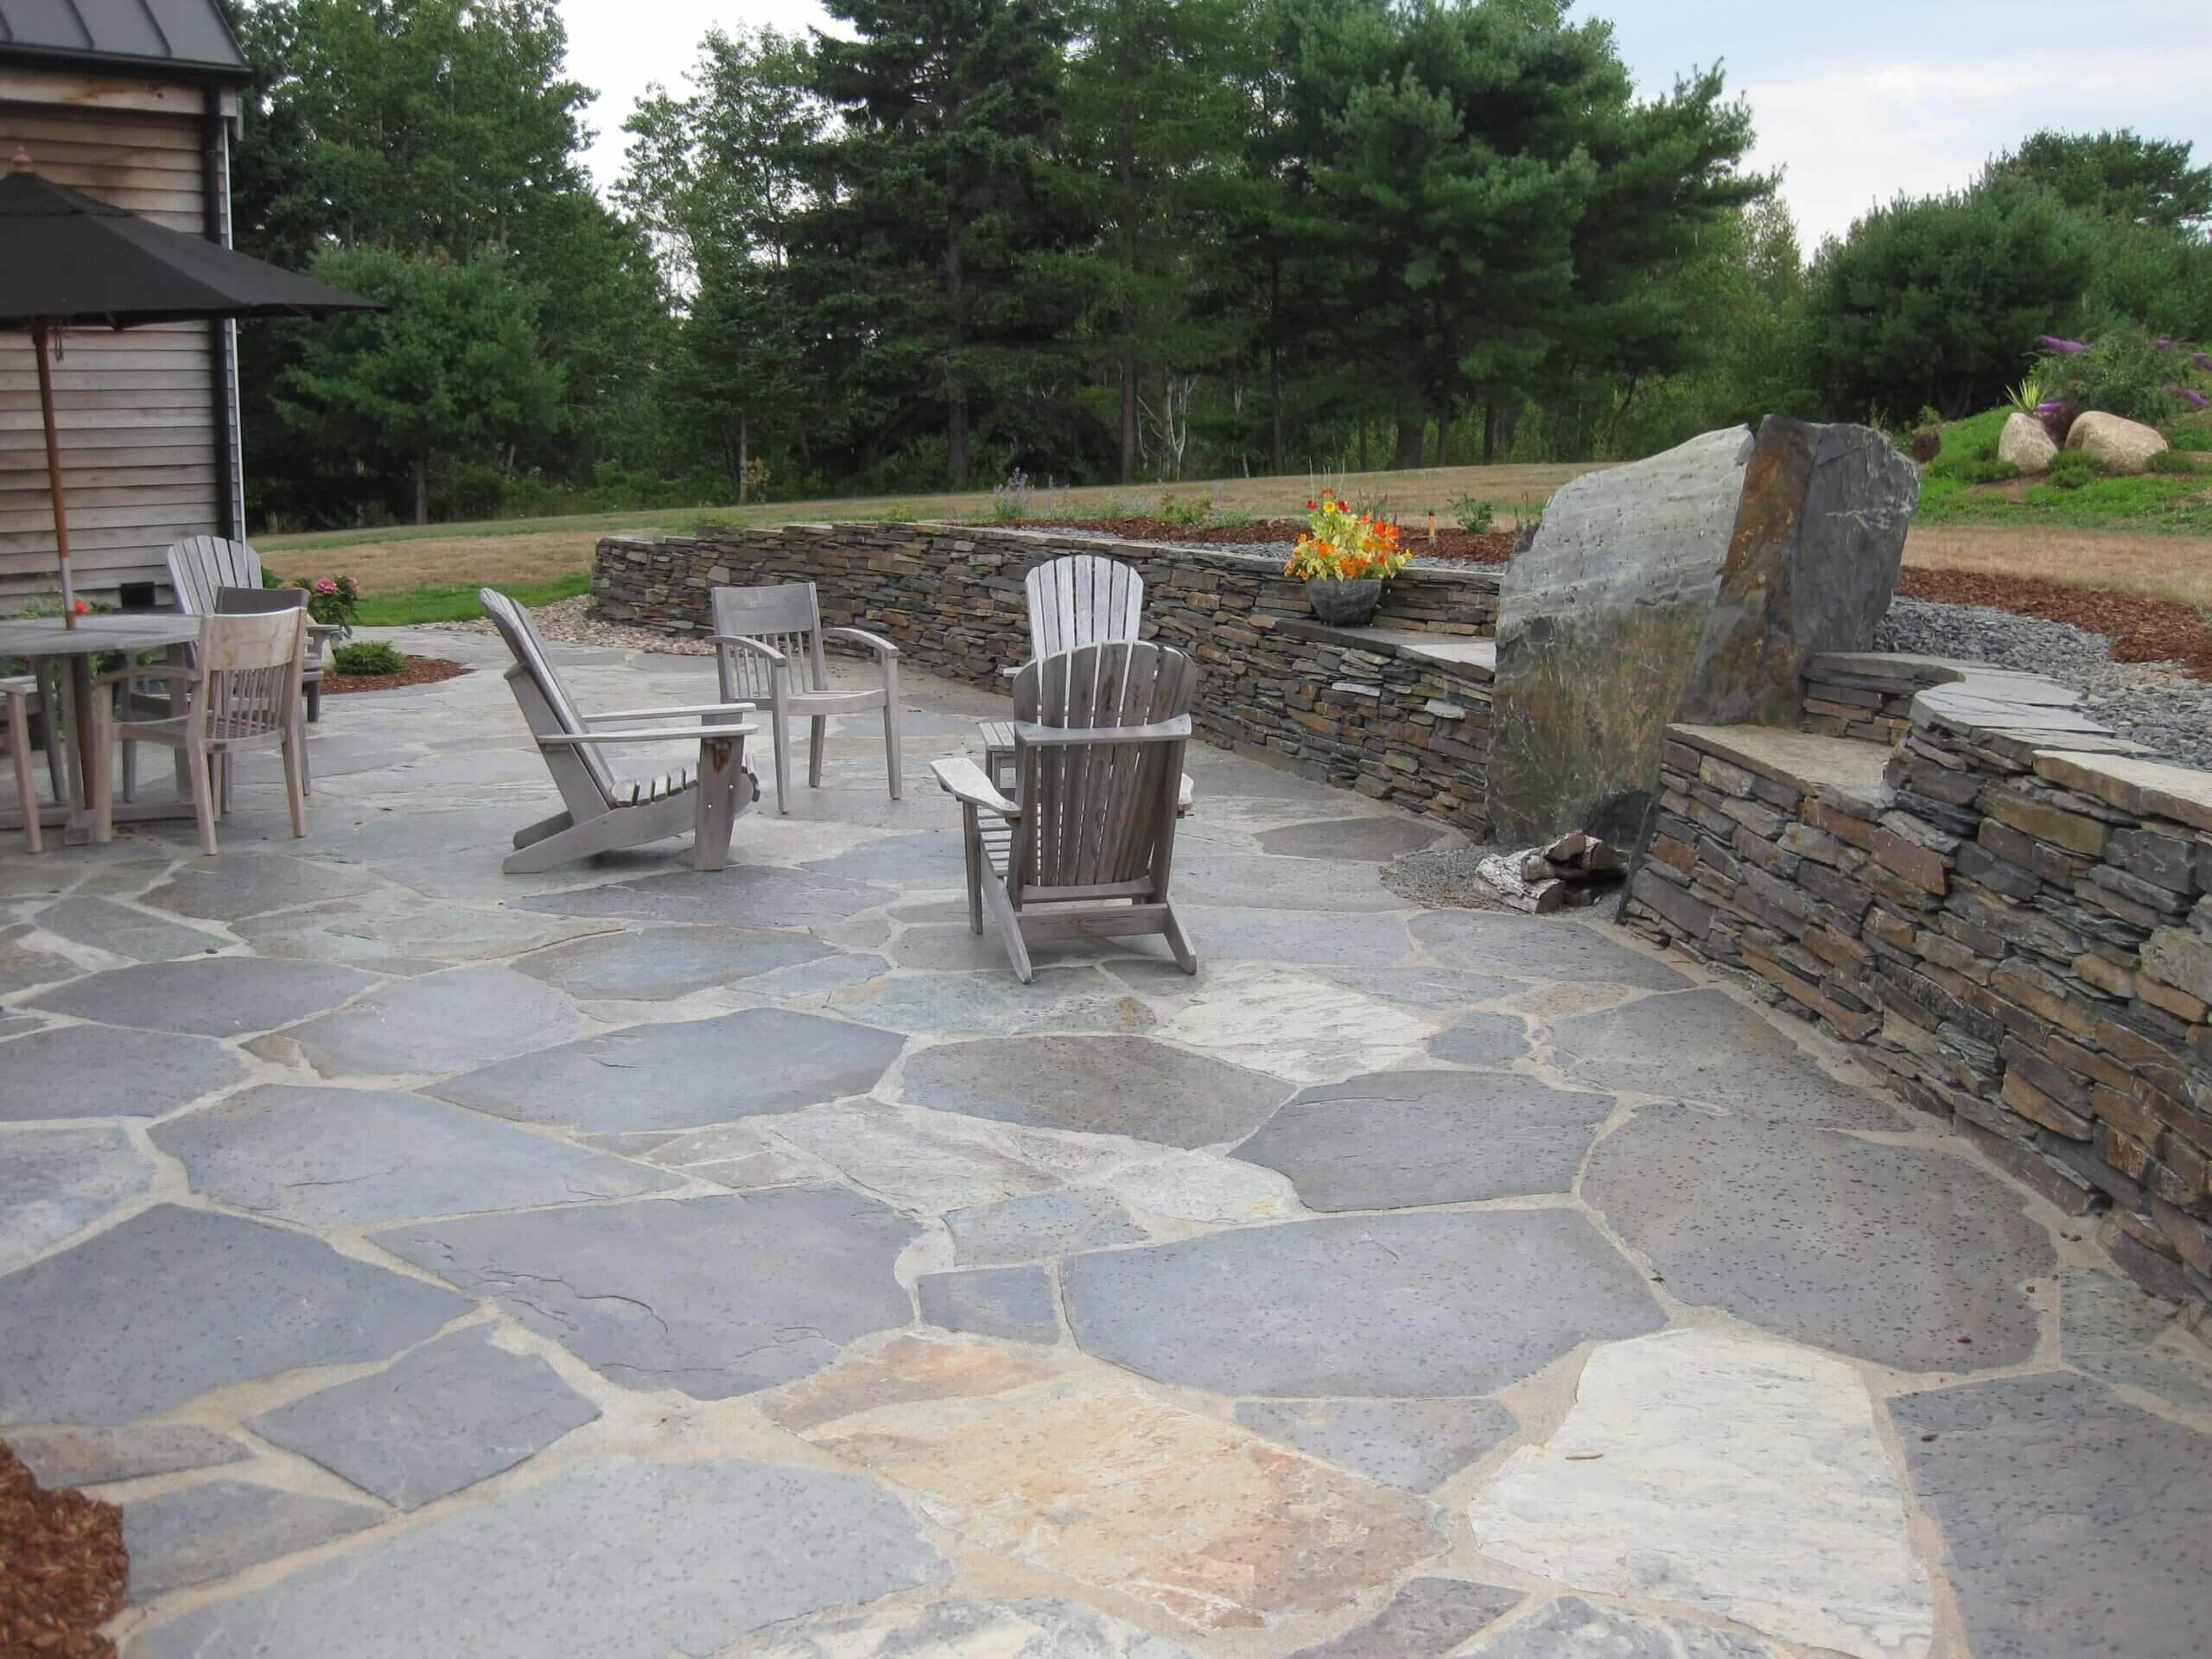 Outdoor seating area with stone flooring